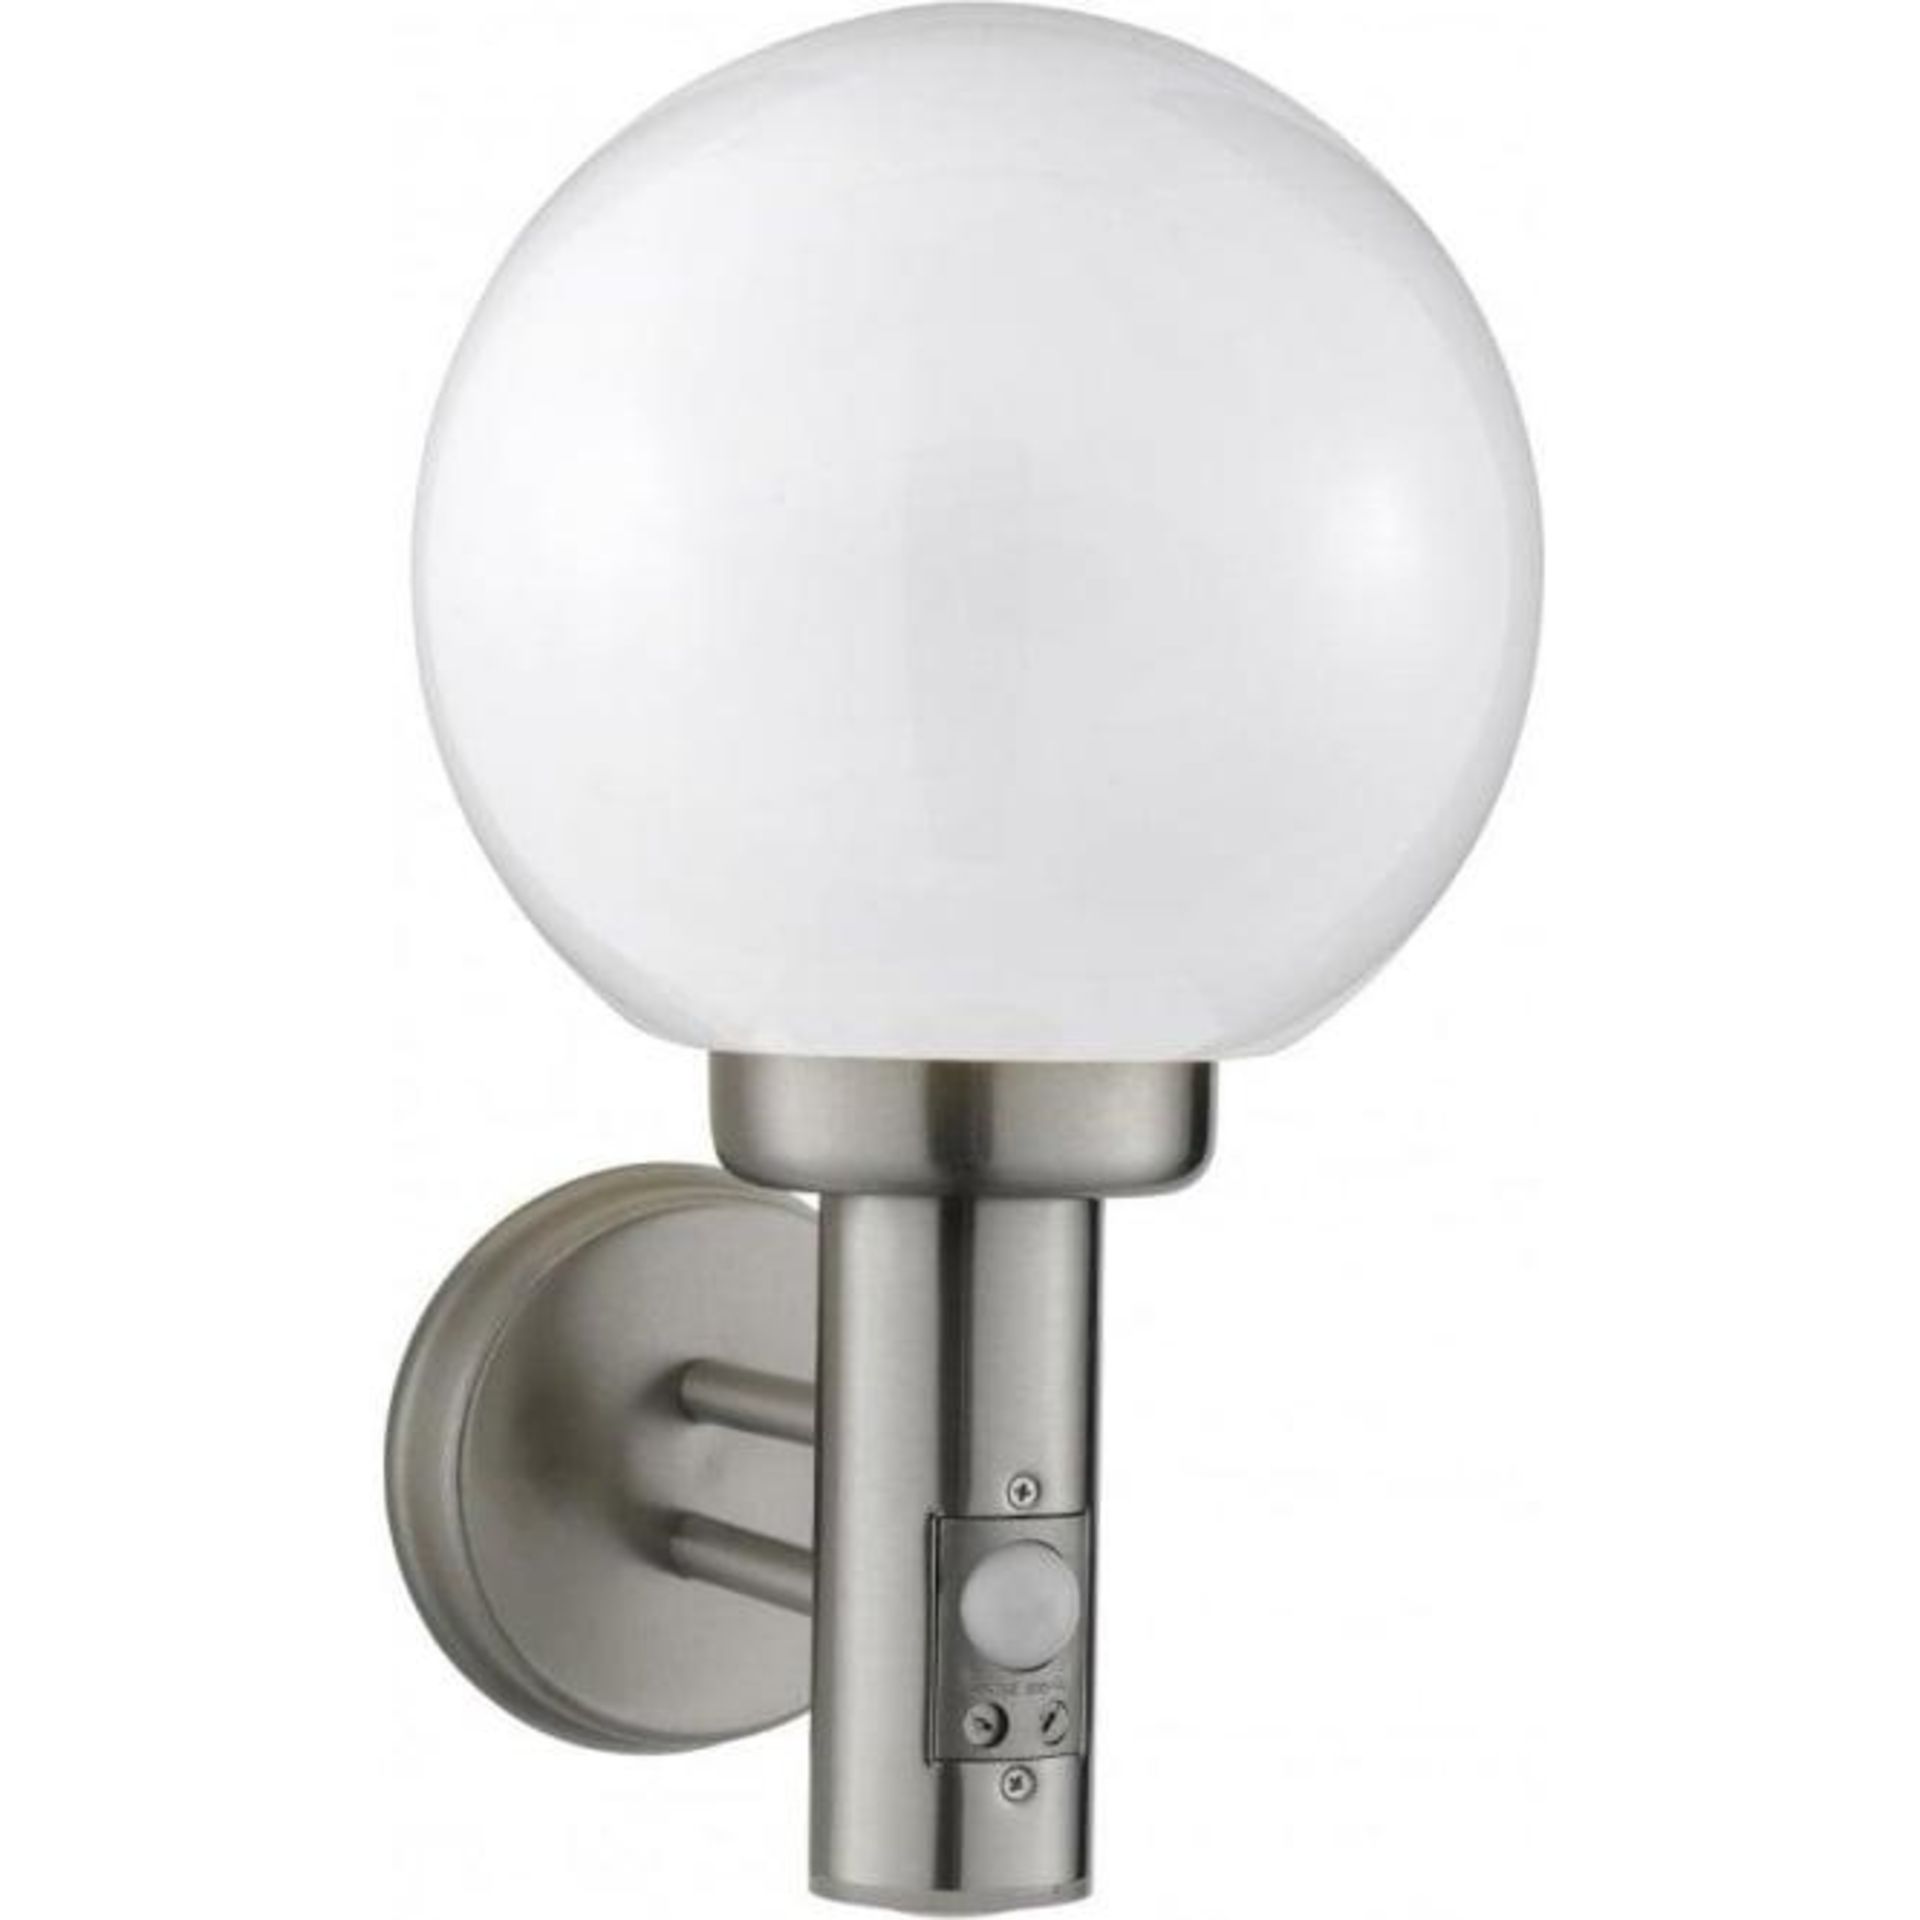 2 x Globe Outdoor Wall Light With PIR Motion Sensor - Stainless Steel With Polycarbonate Shade - IP4 - Bild 2 aus 5